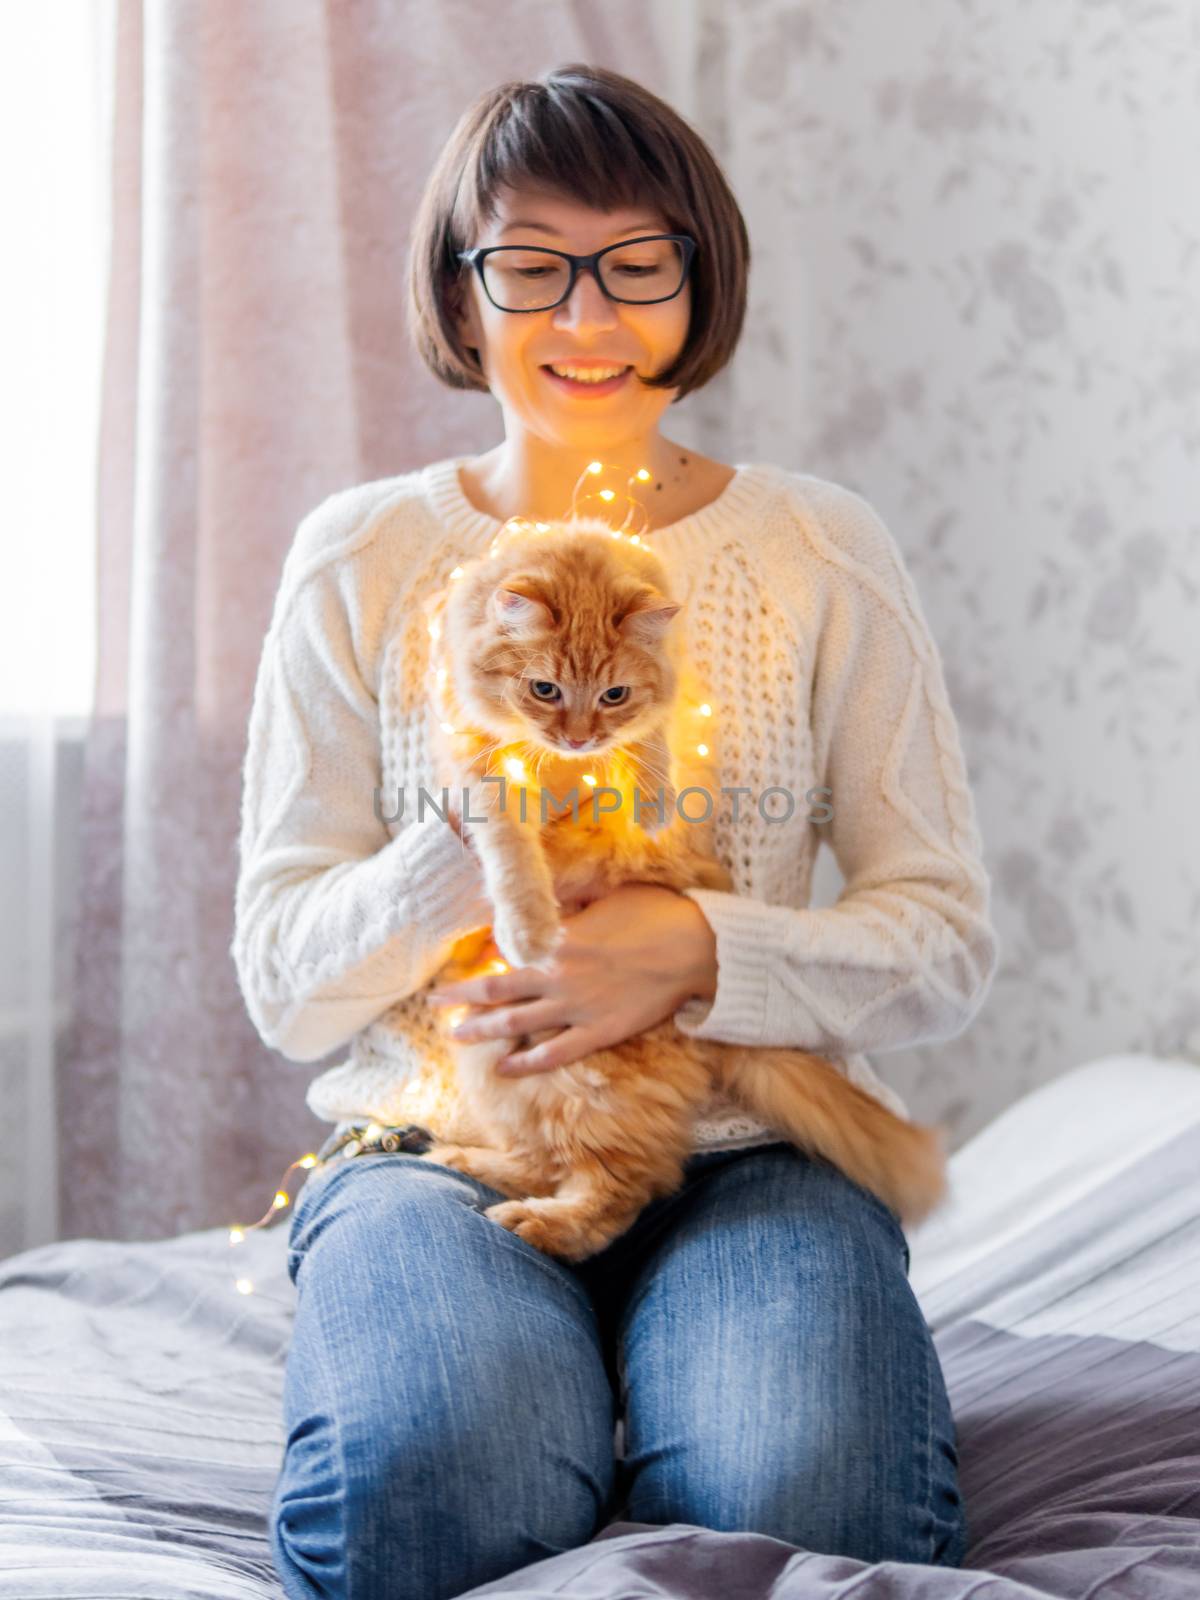 Cute ginger cat tangled in light bulb garland. Woman in knitted sweater trying to make fluffy pet free. Christmas decorations. Cozy home before New Year.